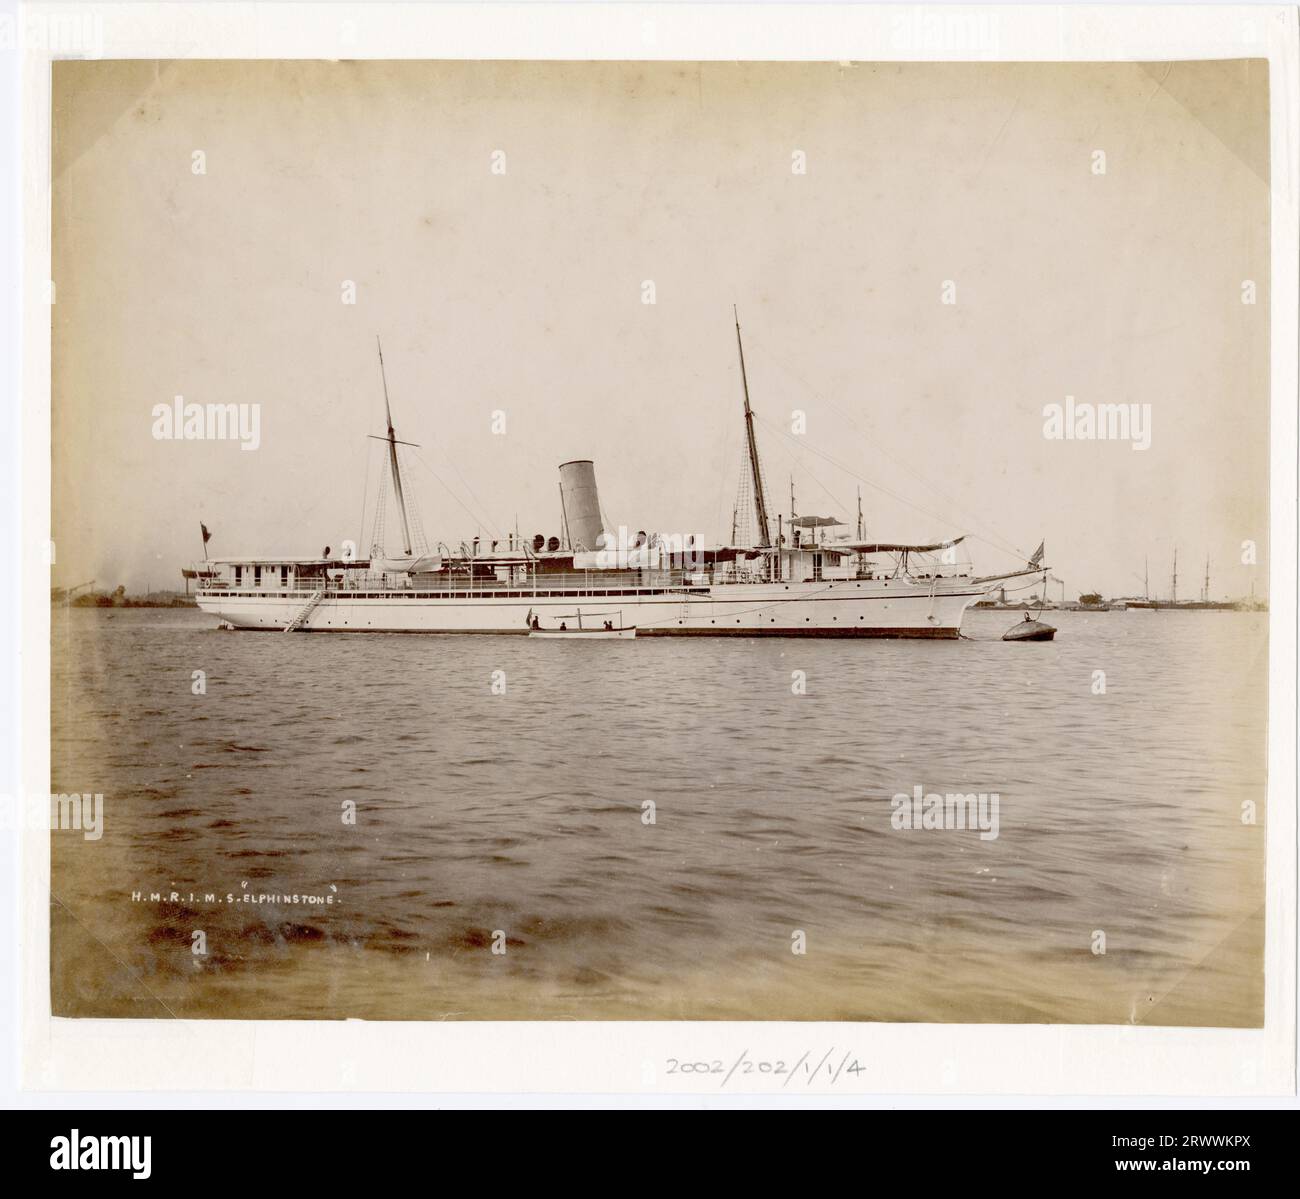 View of a steamship with a single funnel, two masts and two lower decks in a harbour anchorage. Further ships can be seen in the background. Caption inscribed on negative: H.M.R.I.M.S. Elphinstone. Handwritten caption reads: R.I.M.S Elphinstone, Rangoon. Stock Photo